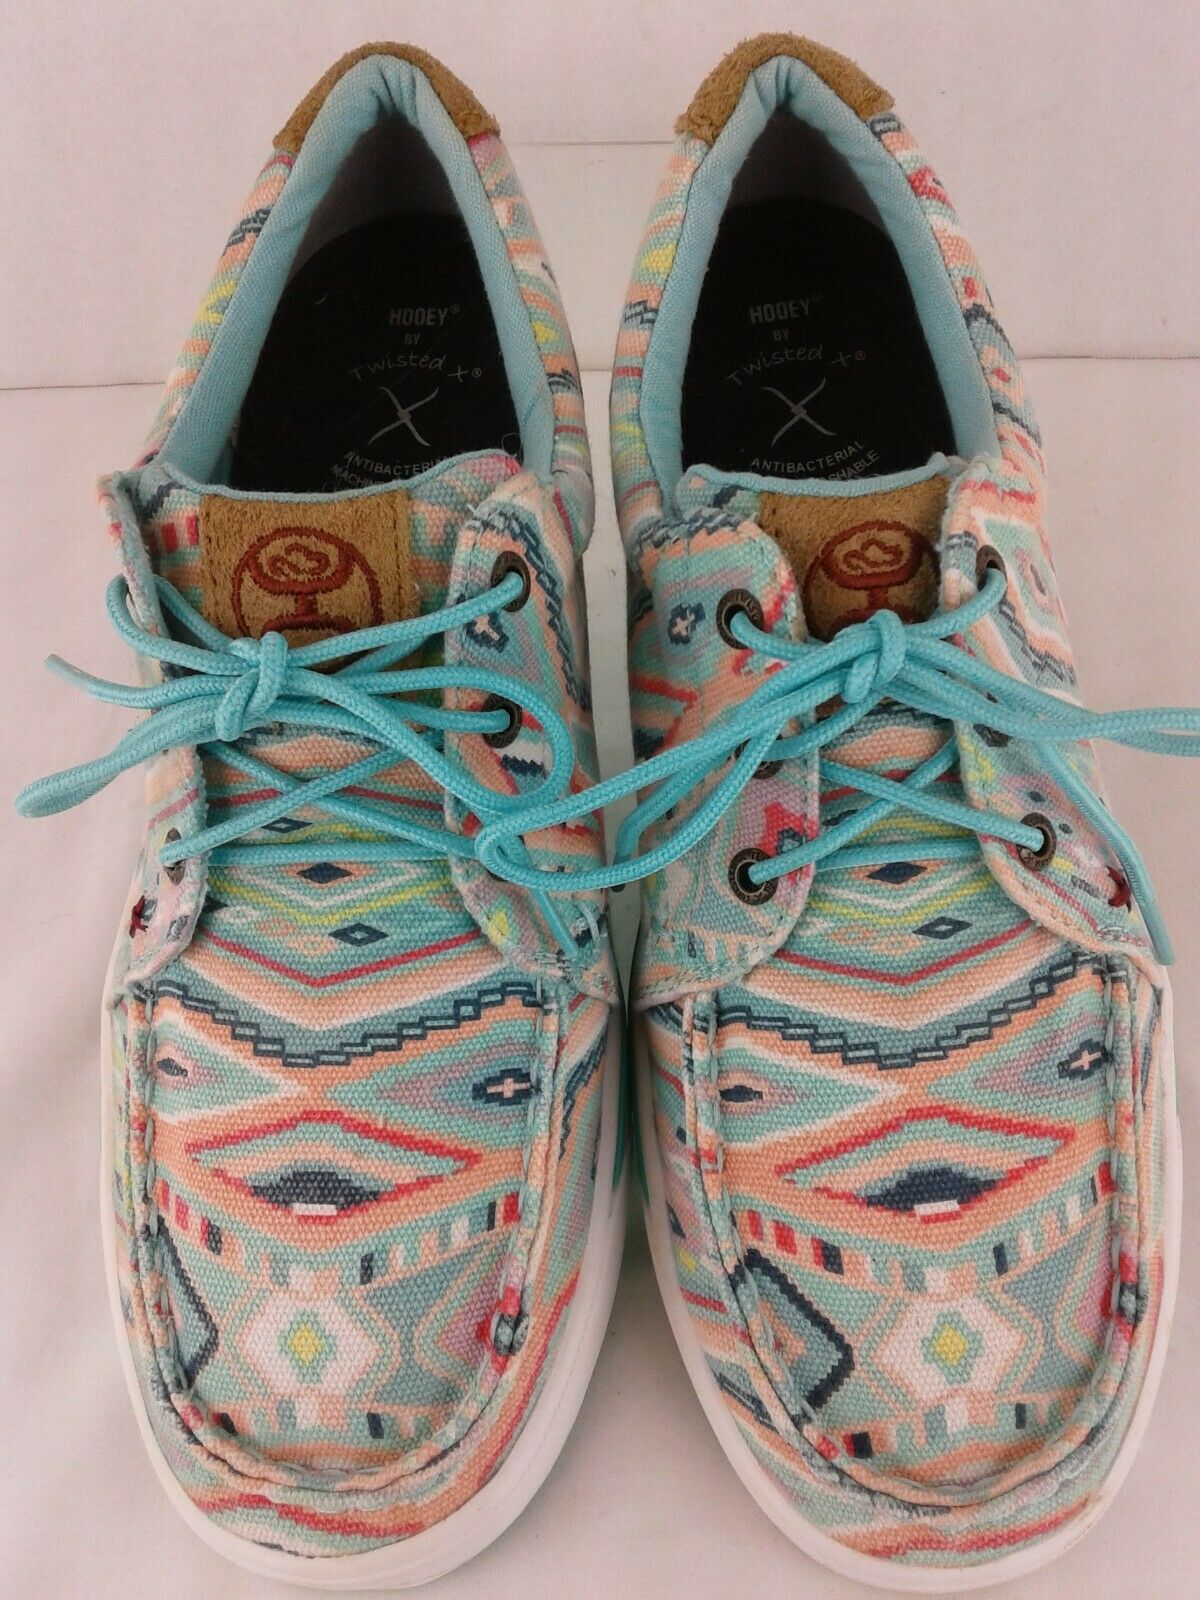 Twisted X Hooey Loper Twill Casual Sneakers Lace Up Shoes Womens Sz 9.5 M